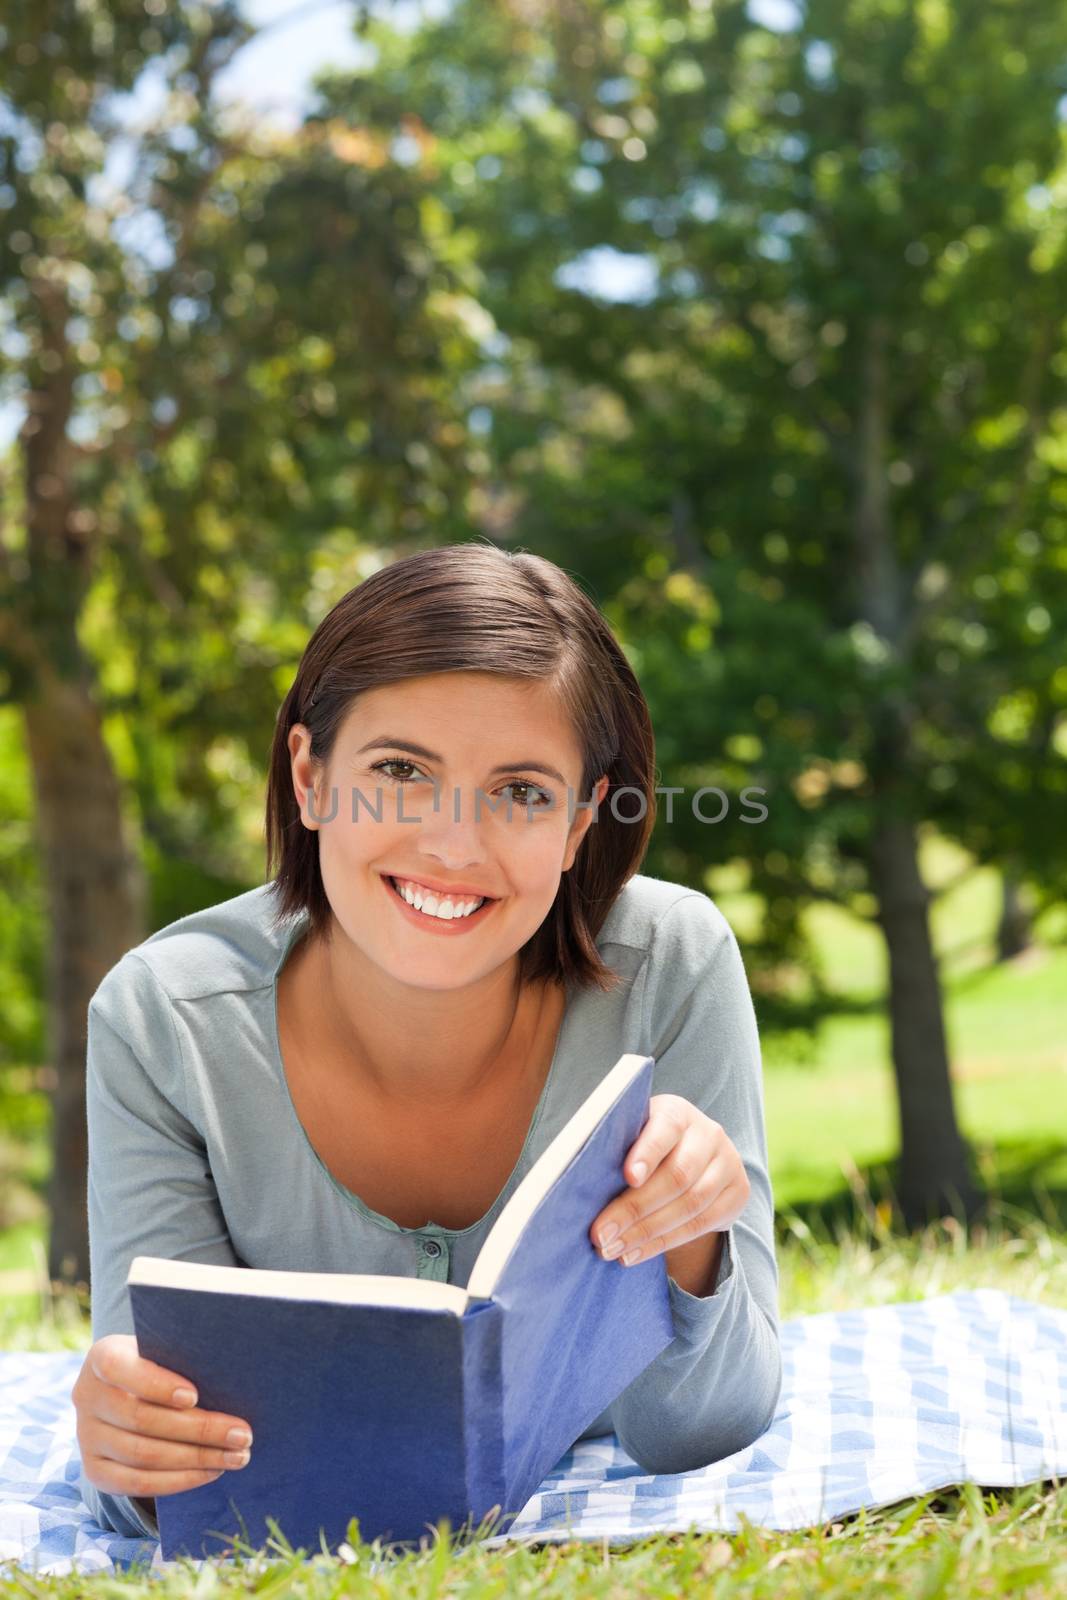 Woman reading a book in the park during the summer